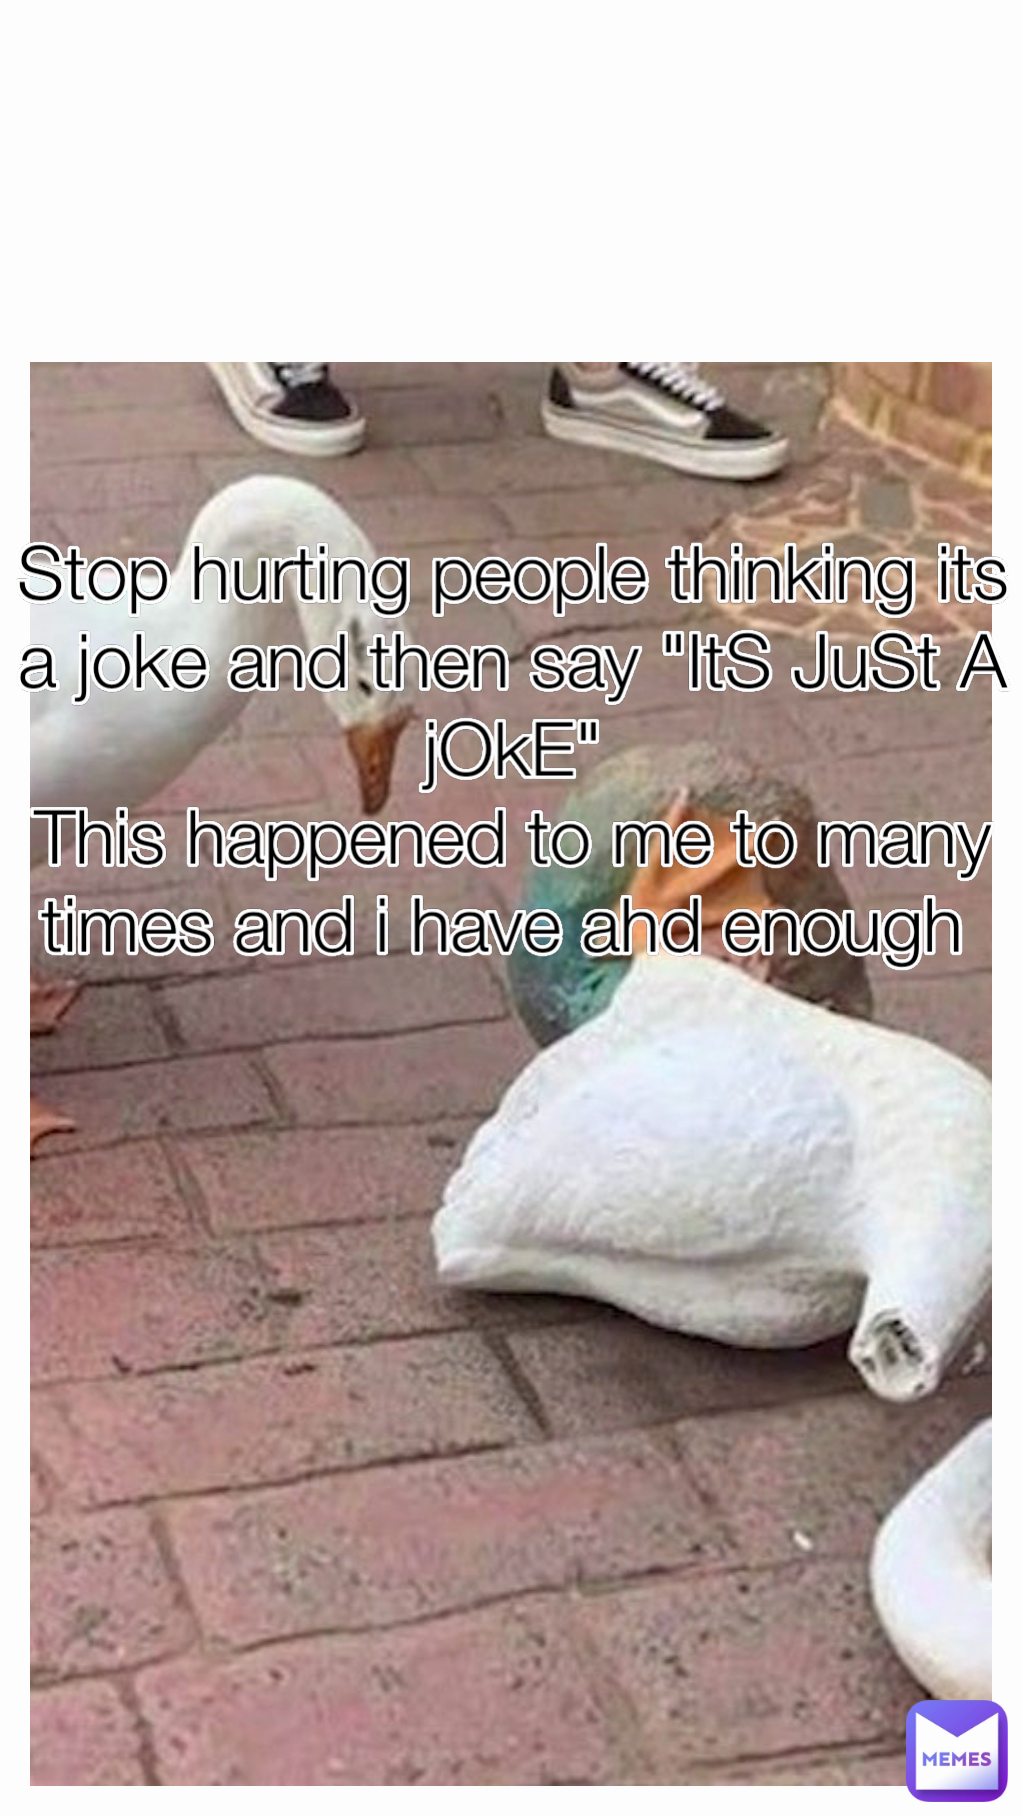 Stop hurting people thinking its a joke and then say "ItS JuSt A jOkE"
This happened to me to many times and i have ahd enough 